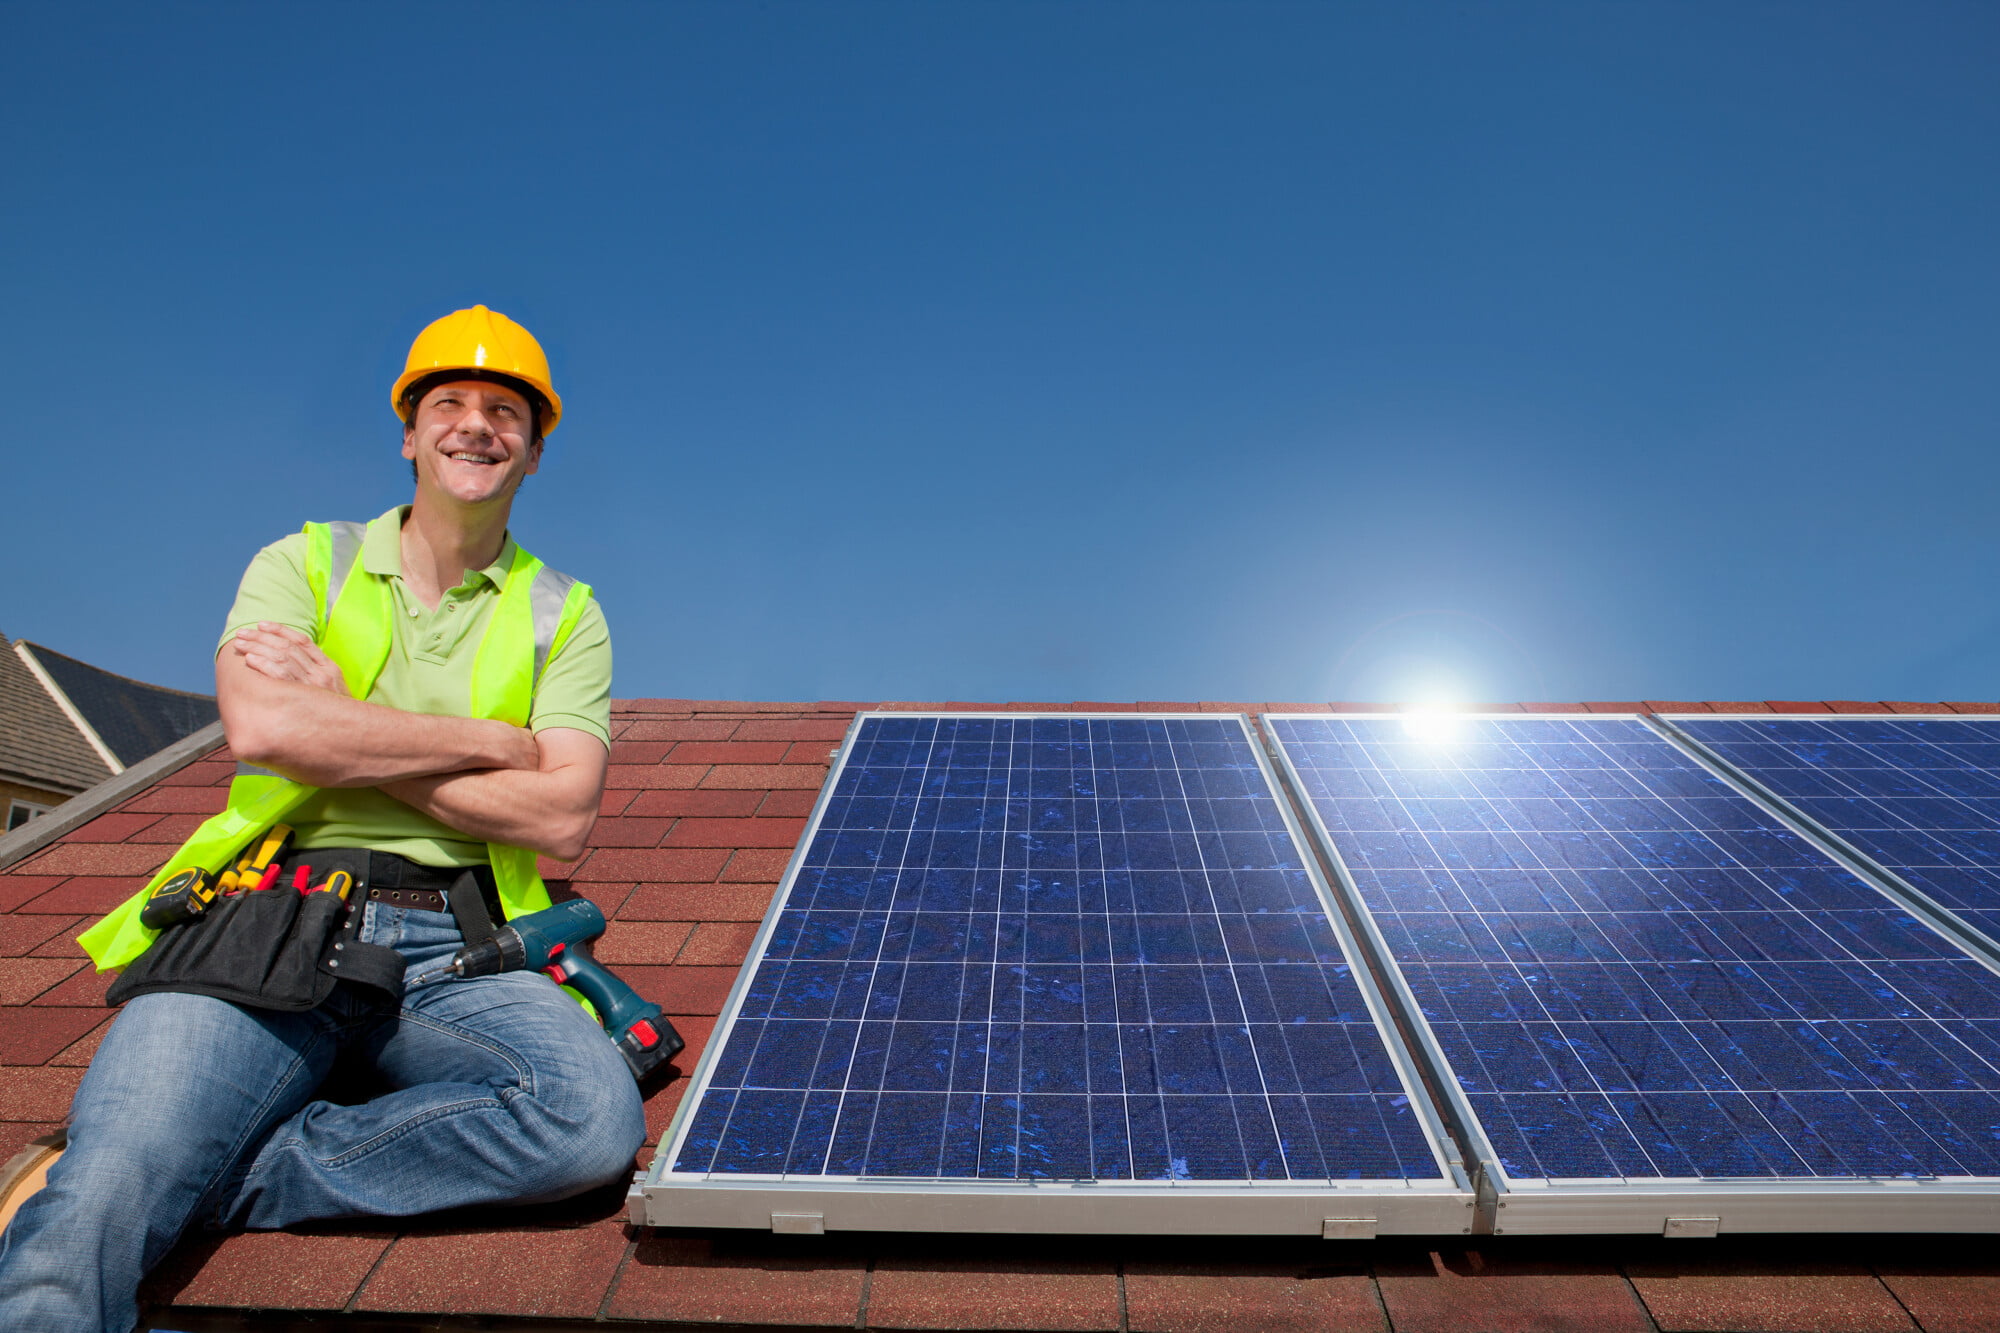 Are you wondering whether or not solar panel installation is right for you? Here are 5 incredible benefits of going solar.